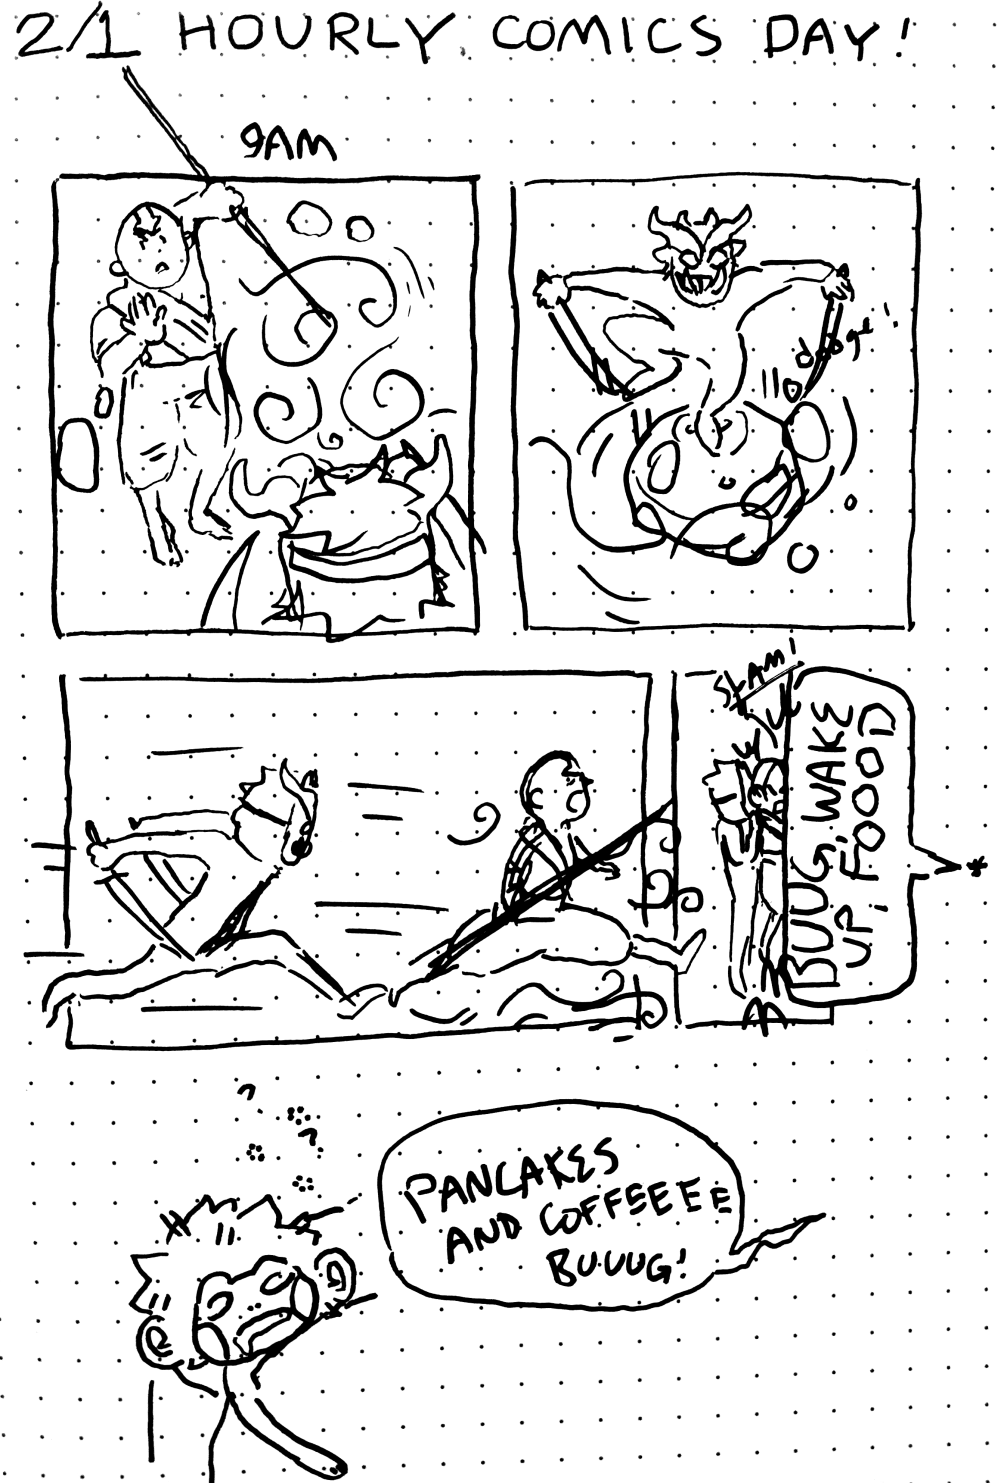 9 am: the first three panels are a fight between aang from avatar and the blue spirit! in panel 4 they run directly into a speech bubble that is momo waking bug up for pancakes and coffee